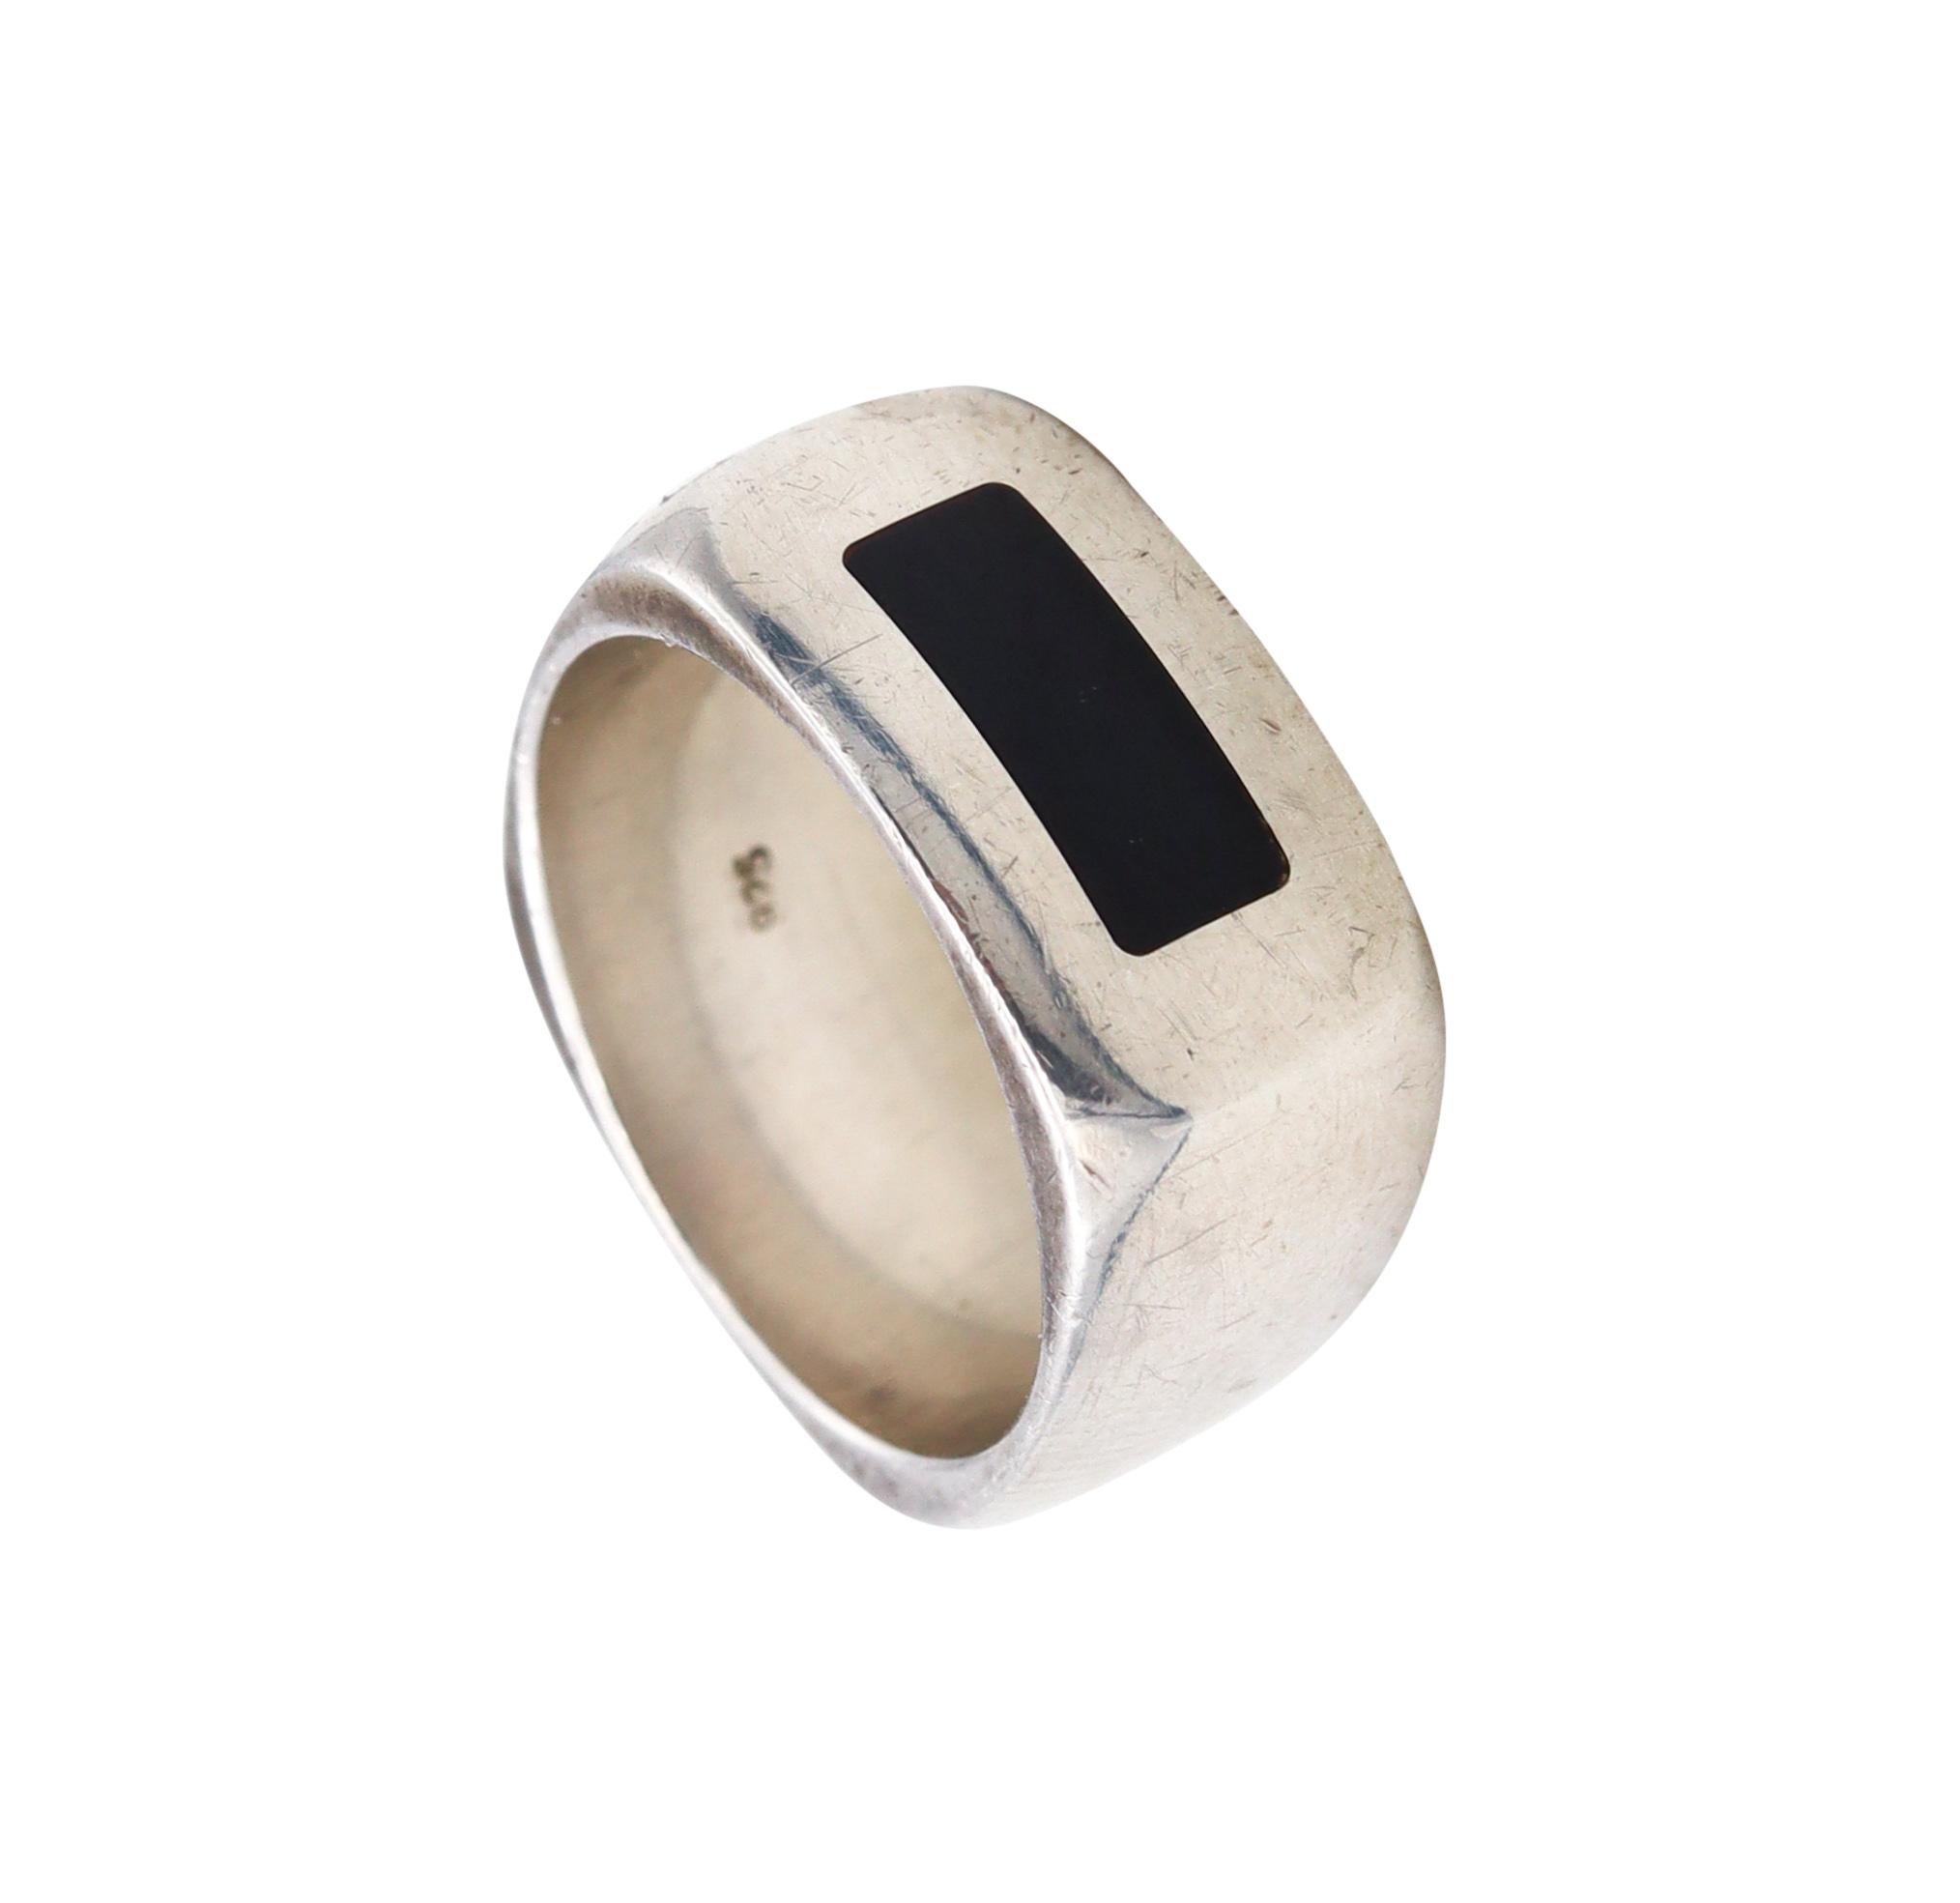 A geometric ring designed by Dinh Van.

Nice modernist band ring, made in Paris, France by the master jewelry designer Jean Dinh Van. It was crafted, with a cushioned shape in solid .925/1000 sterling silver.

Has a weight of 10.5 grams and the